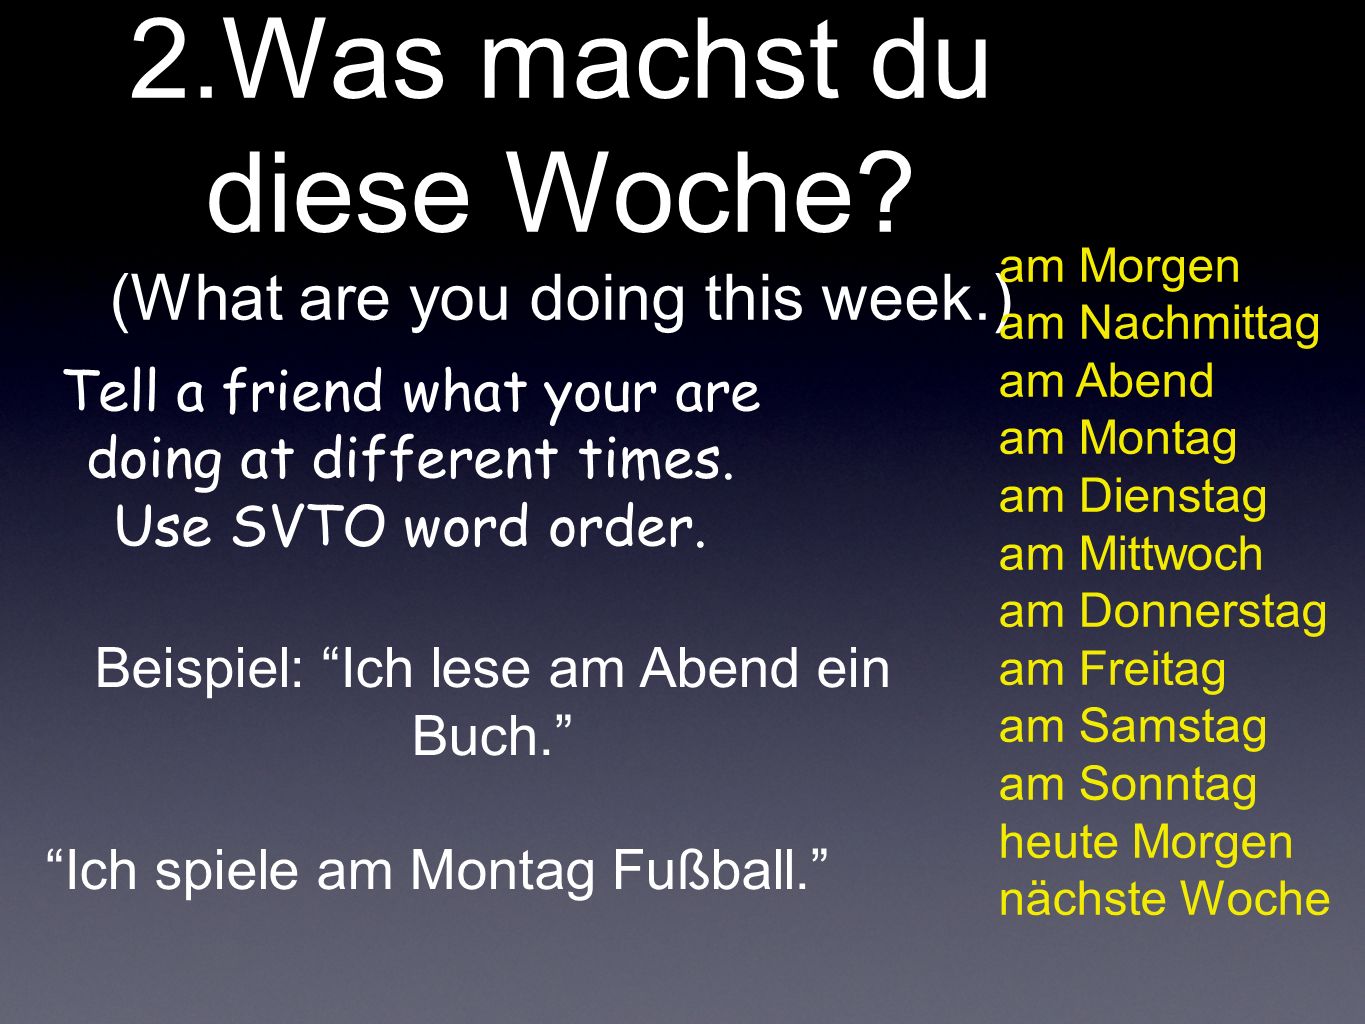 2.Was machst du diese Woche (What are you doing this week.)